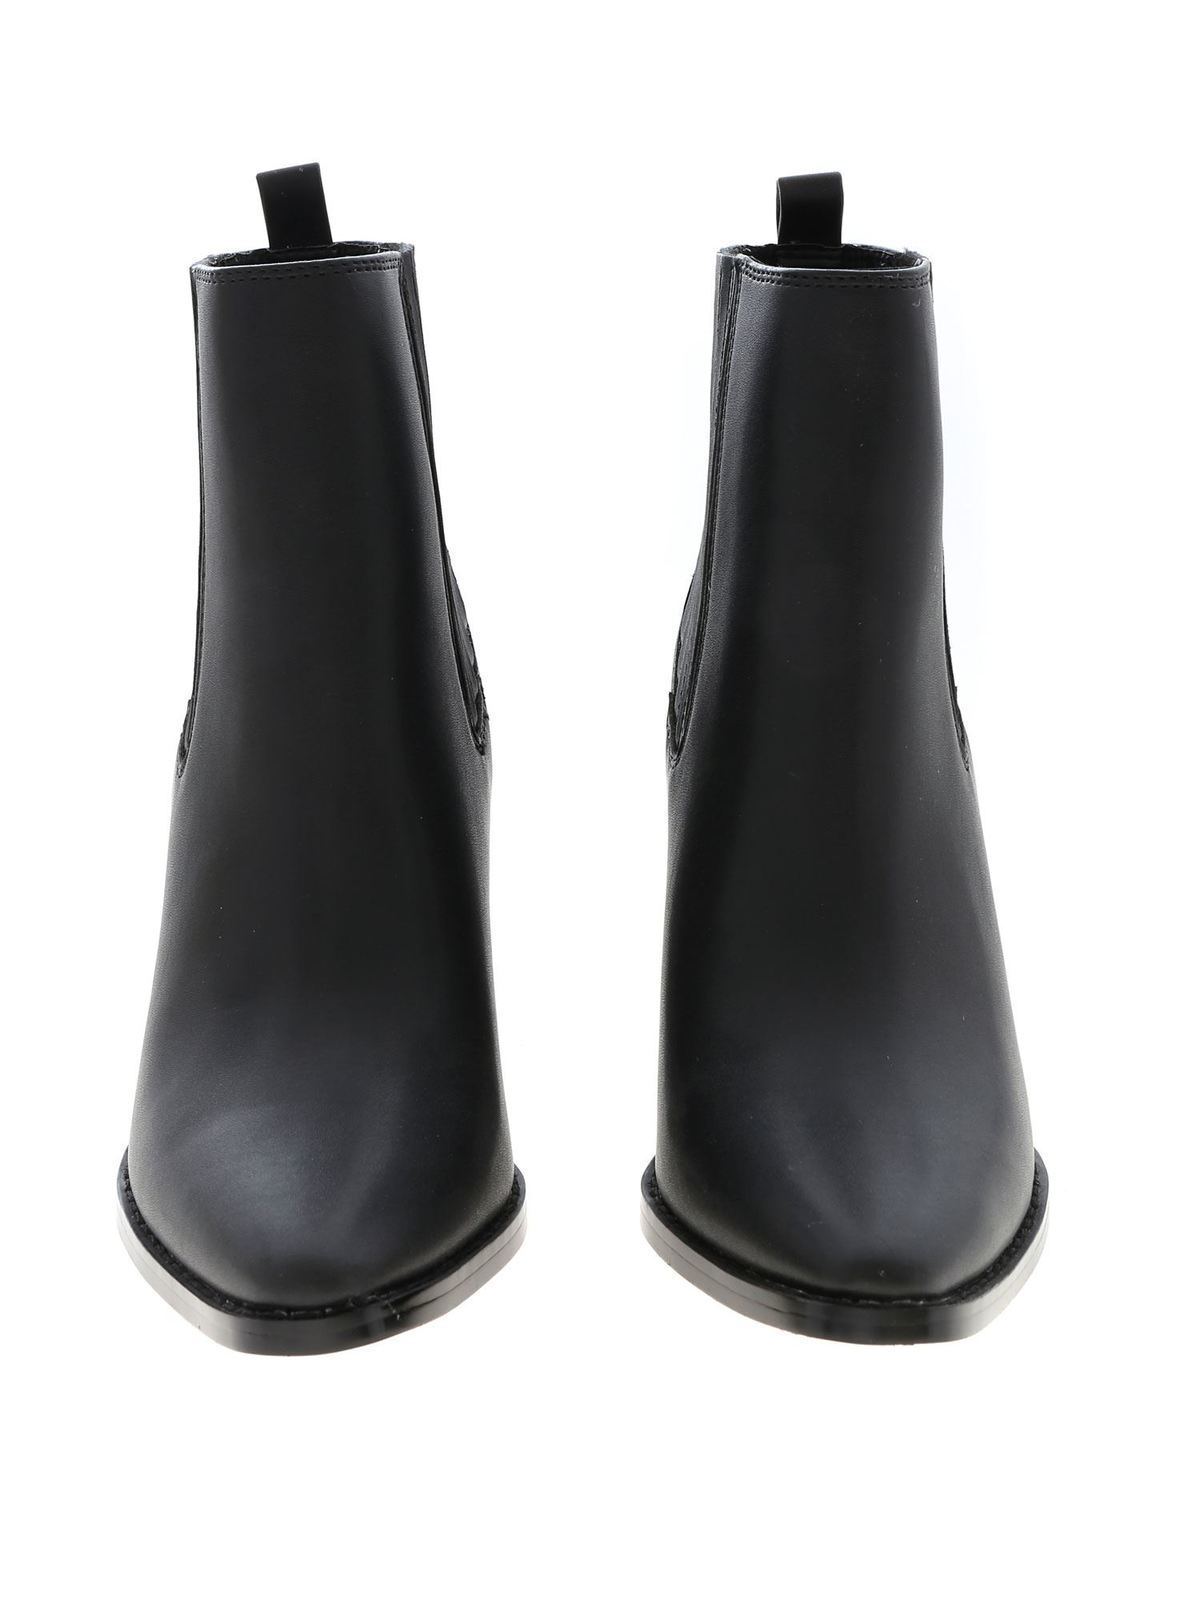 Boots Kendall + Kylie - Colt black pointy ankle boots - COLTBBLACK